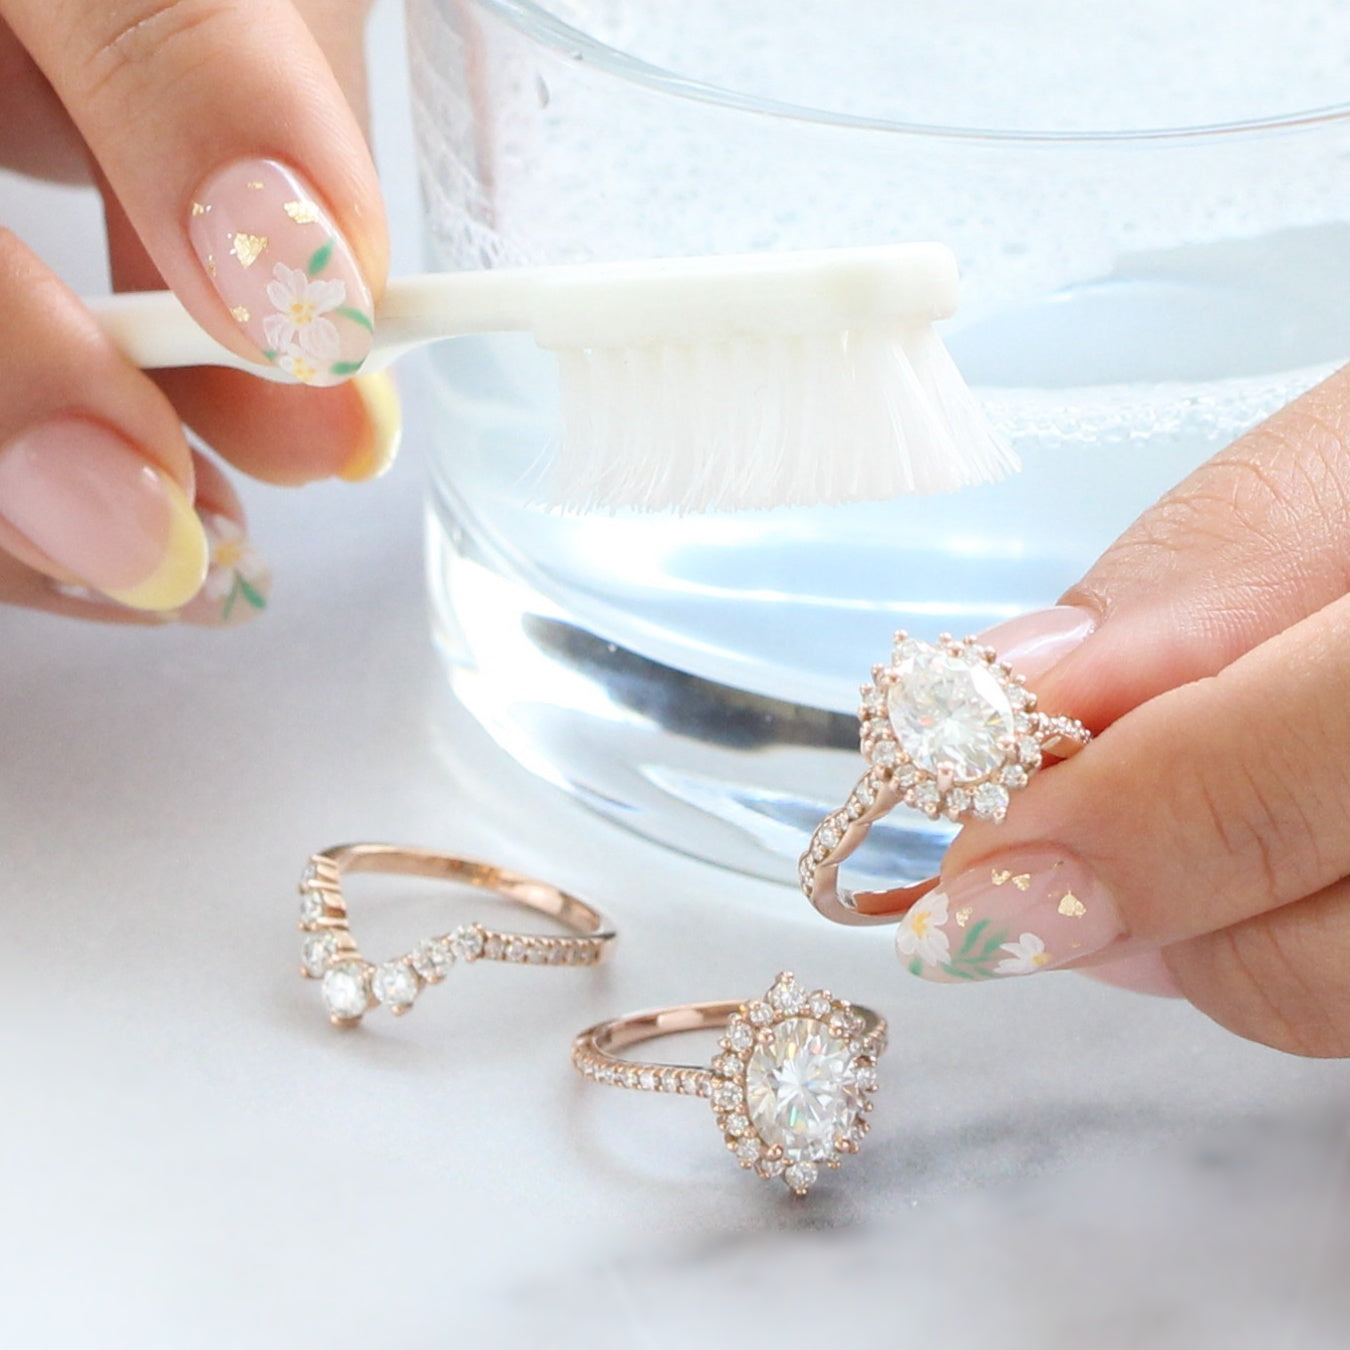 how to clean ring jewelry at home - jewelry cleaning guide by la more design